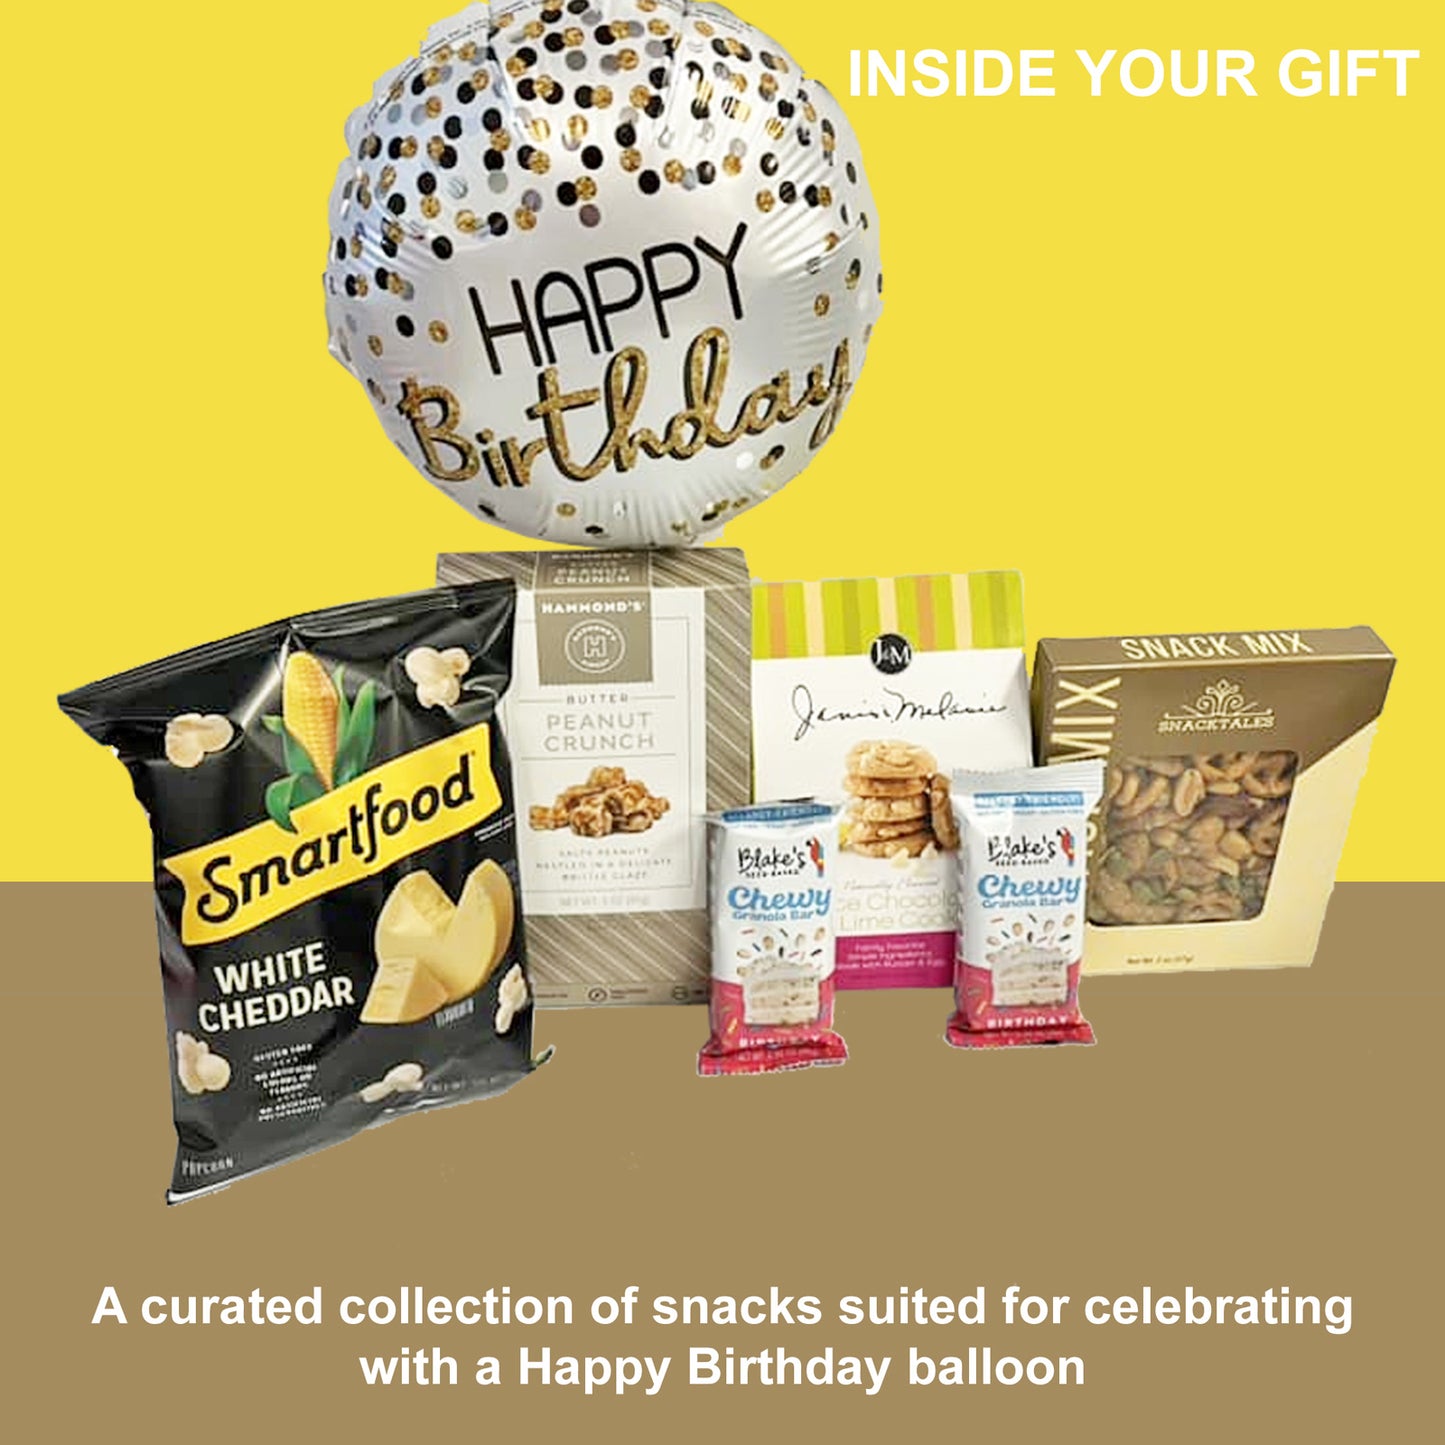 Celebrate Happy Birthday Gift Box Birthday Treats for All Ages Unisex Design Send Birthday Wishes to Kids, Parents, Friends, Employees, Students